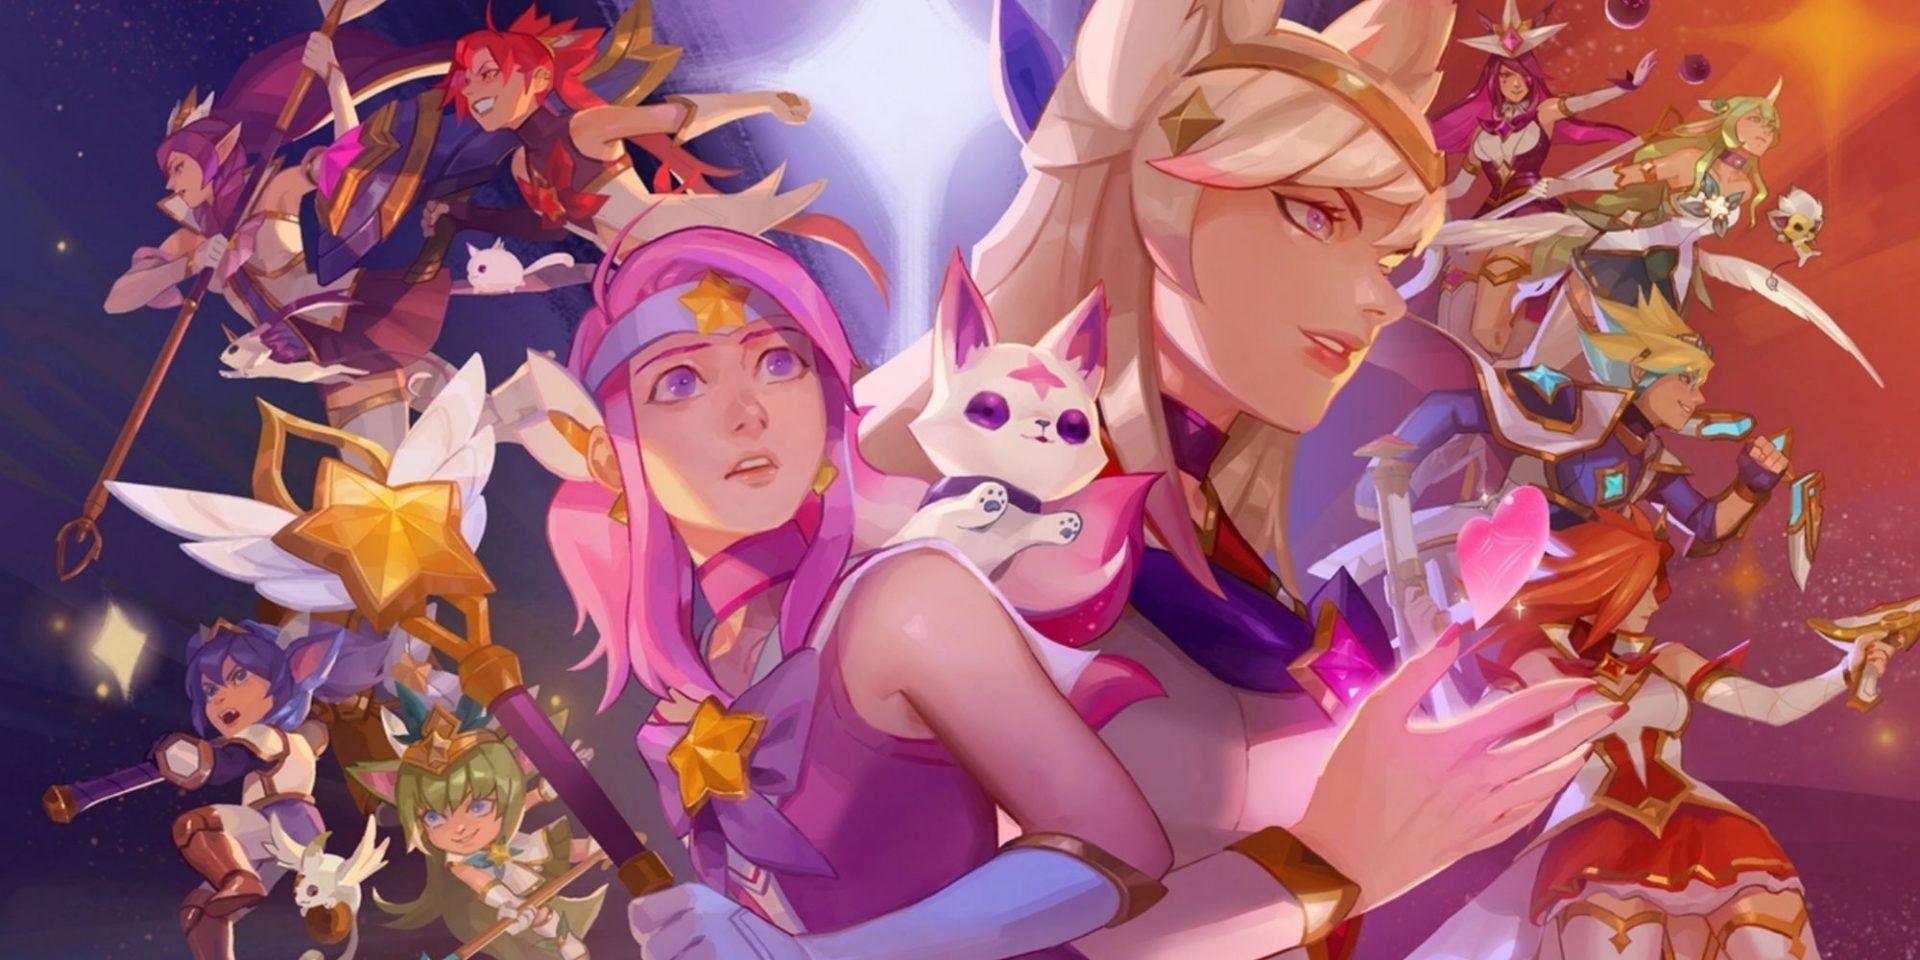 Artwork of the Star Guardians from League of Legends.